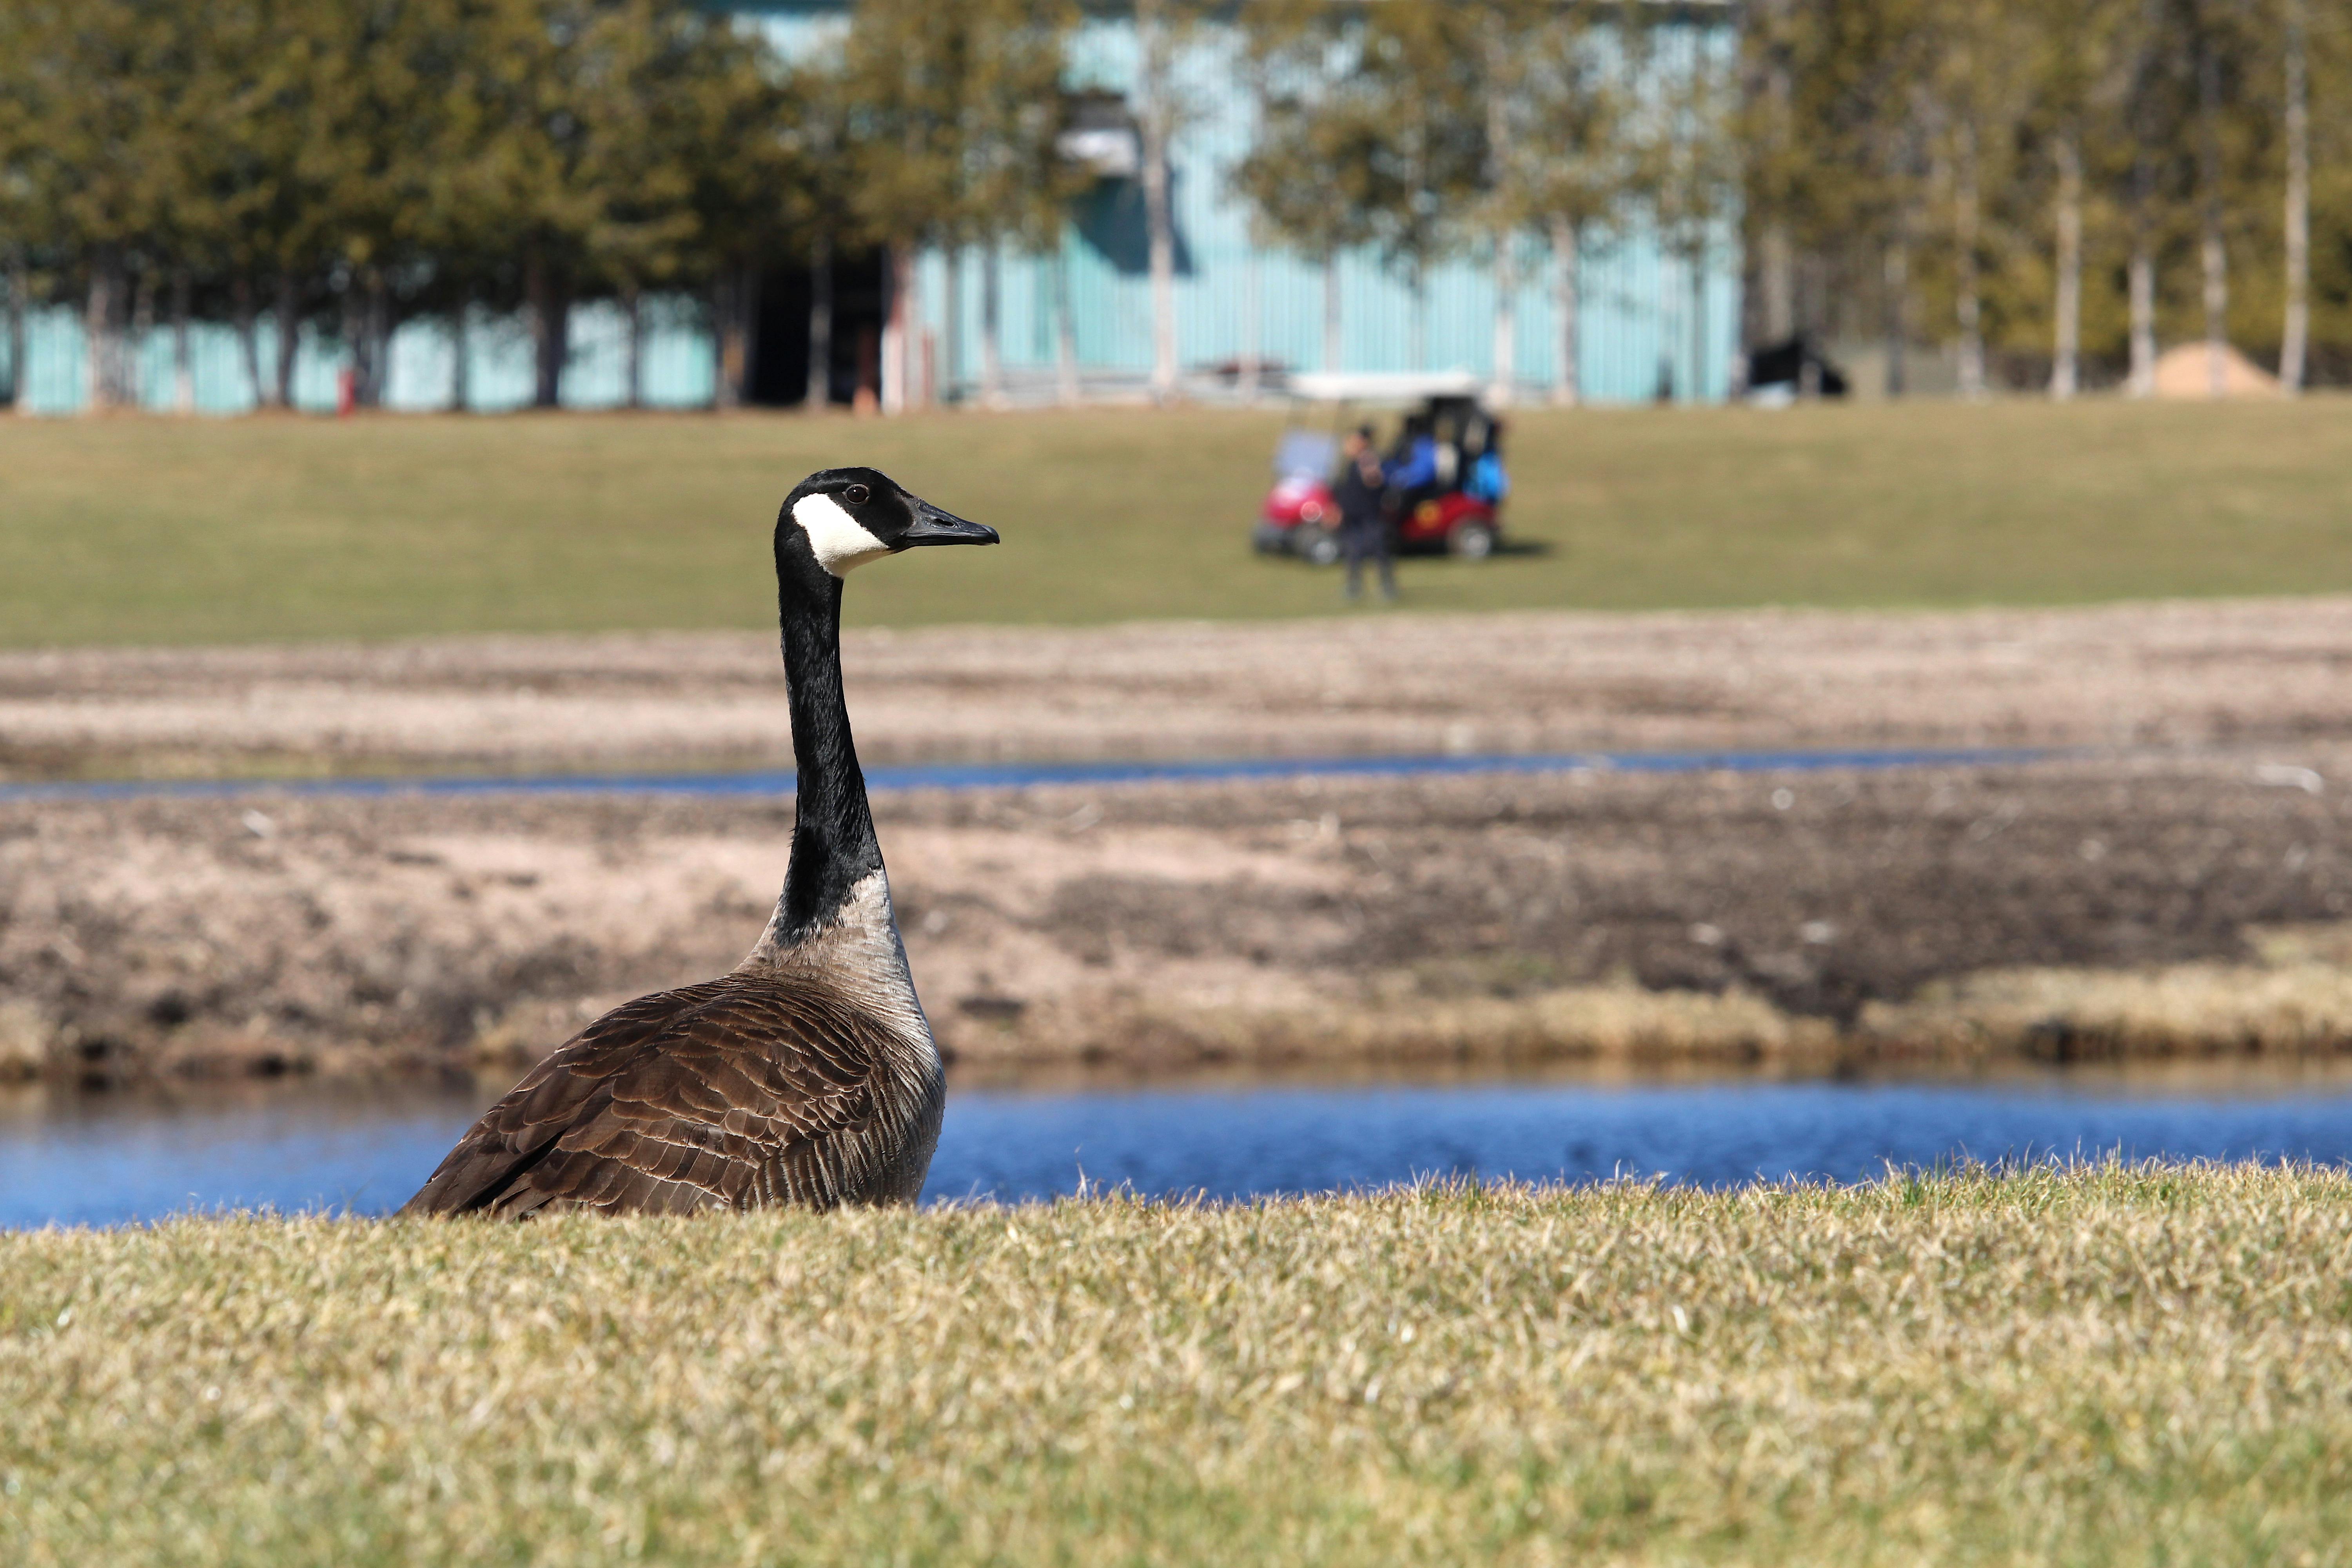 COMMENTARY: Can we rehabilitate the image of the Canada goose?